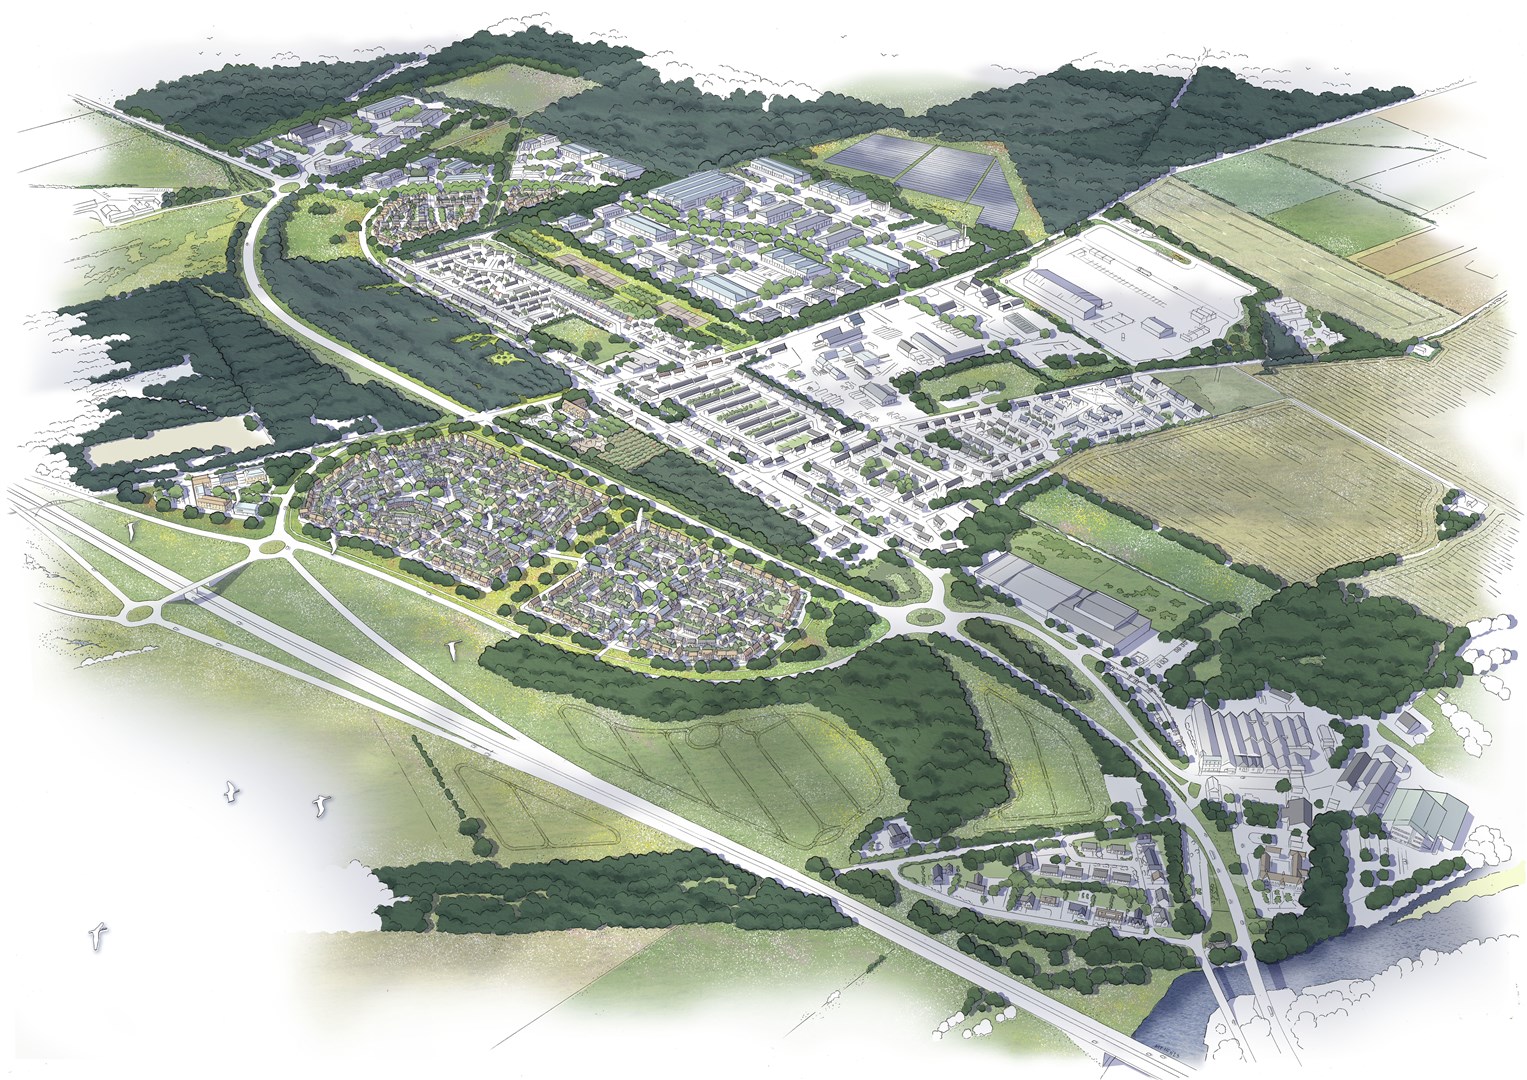 An artist's impression of how Mosstodloch will look if proposals to develop the village are approved.